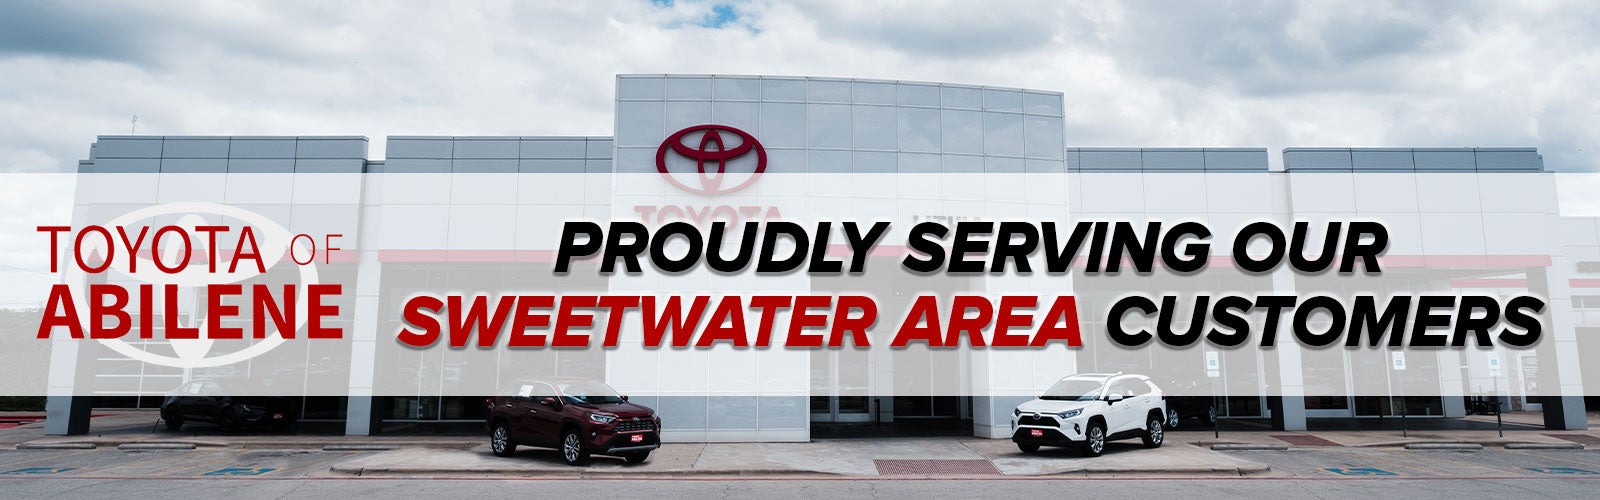 image banner of Lithia Toyota with proudly servicing Sweetwater text